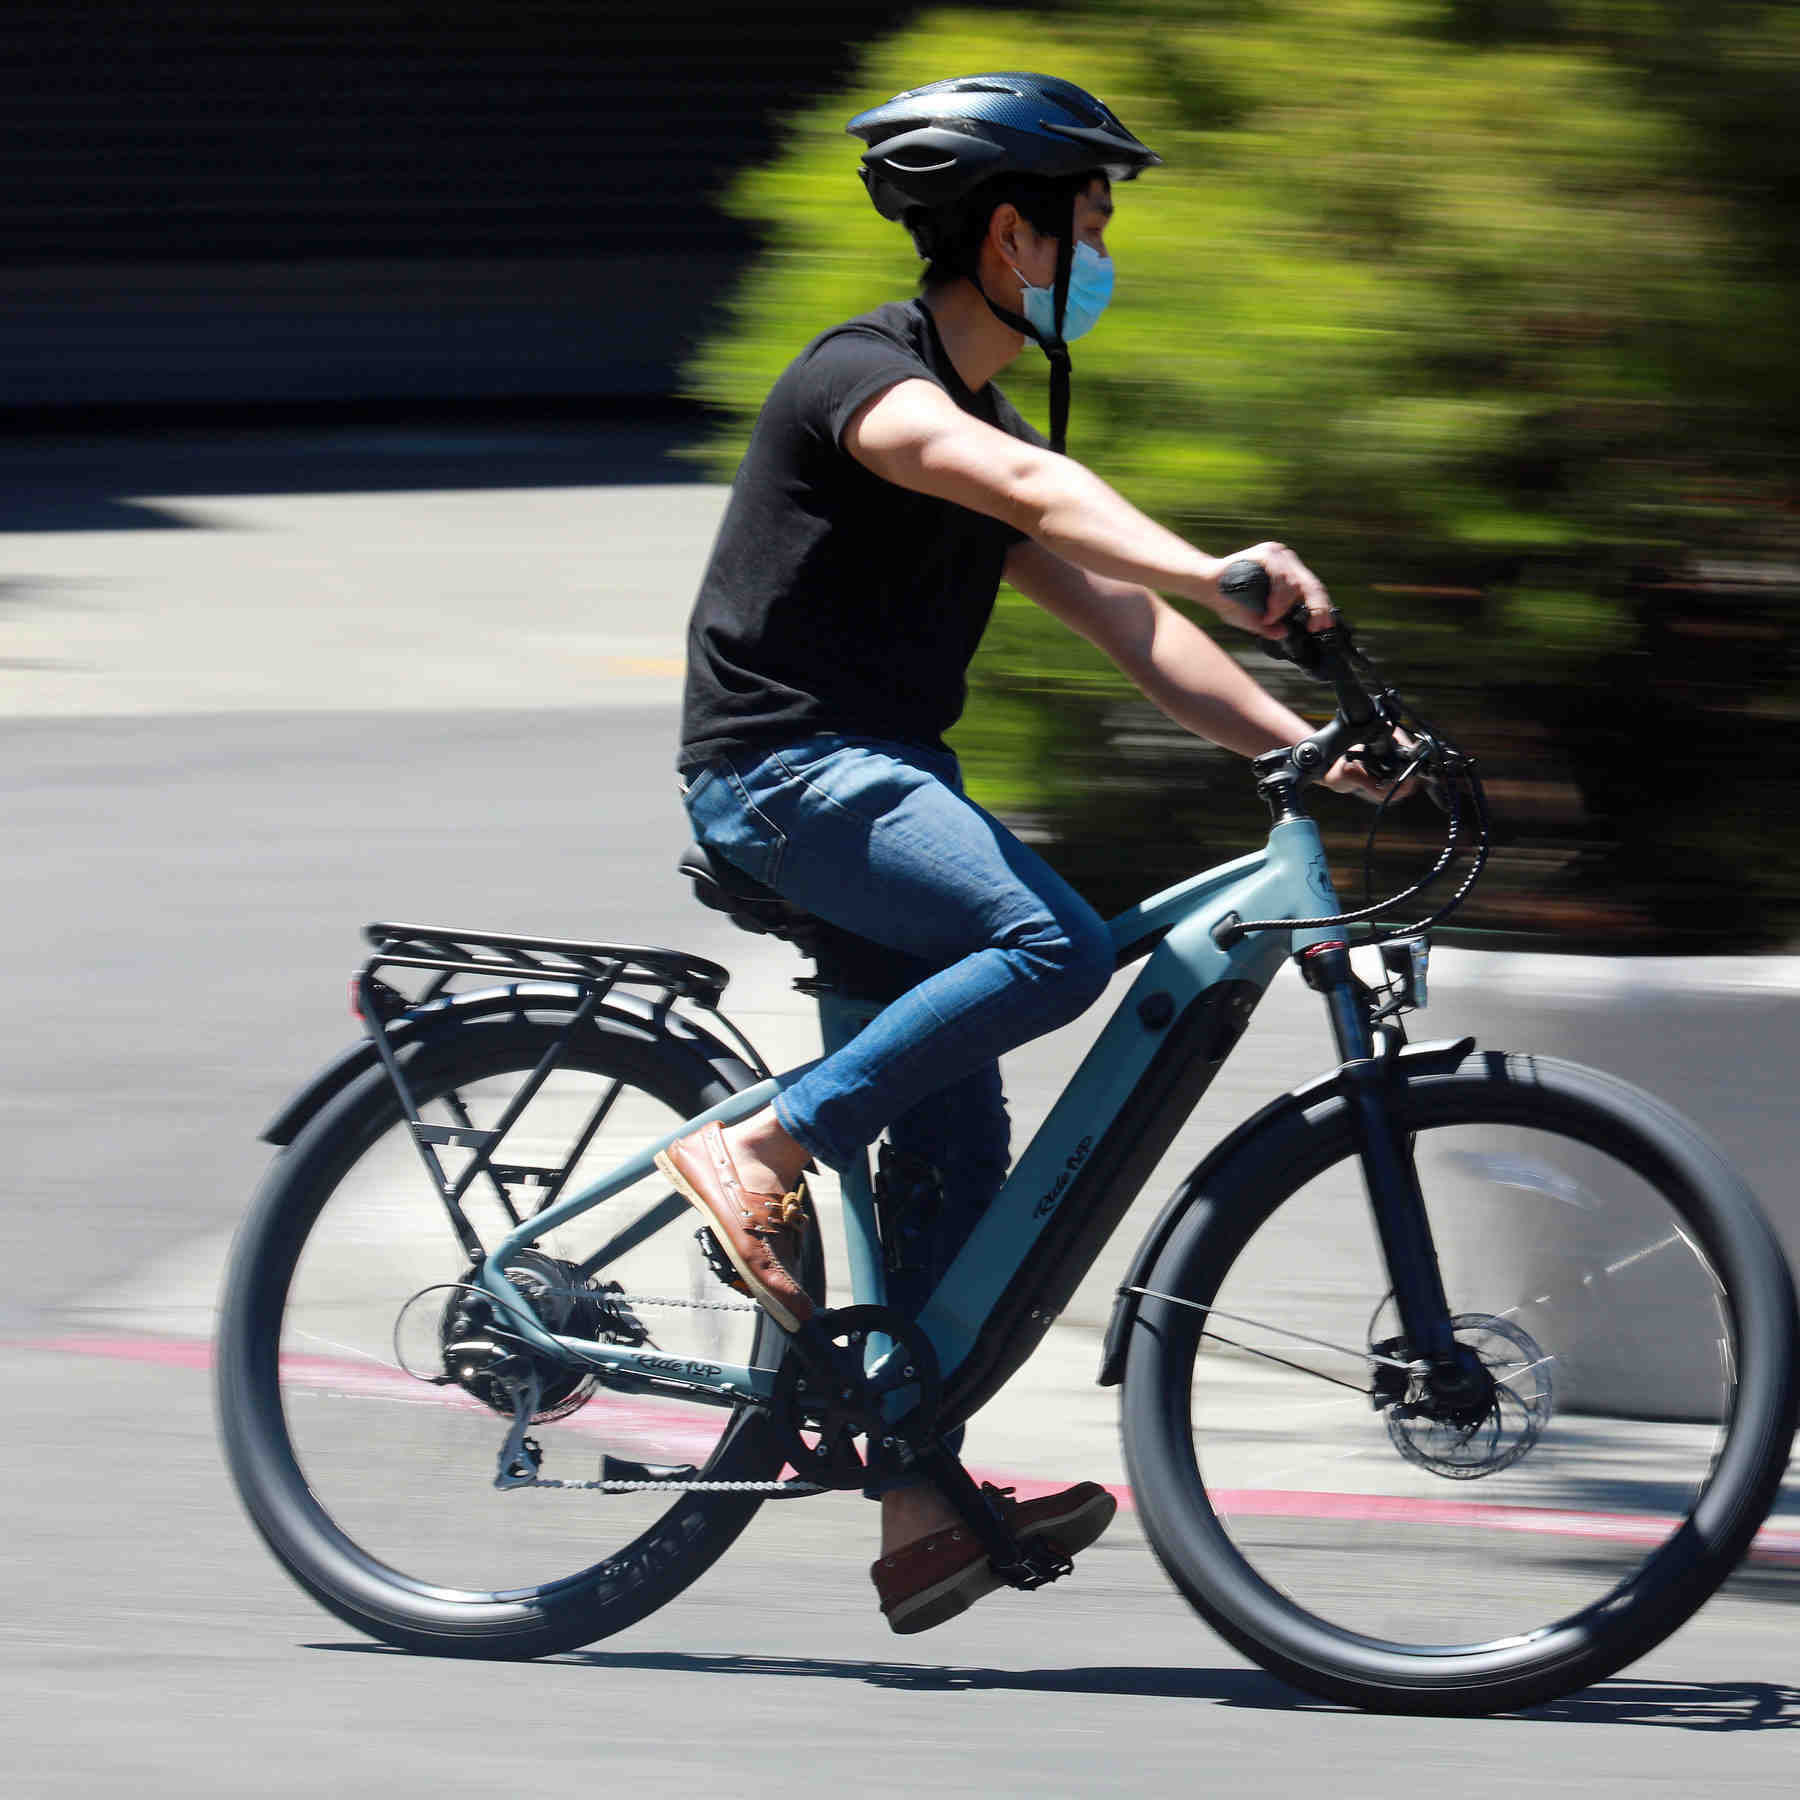 What is the speed limit for an electric bike?